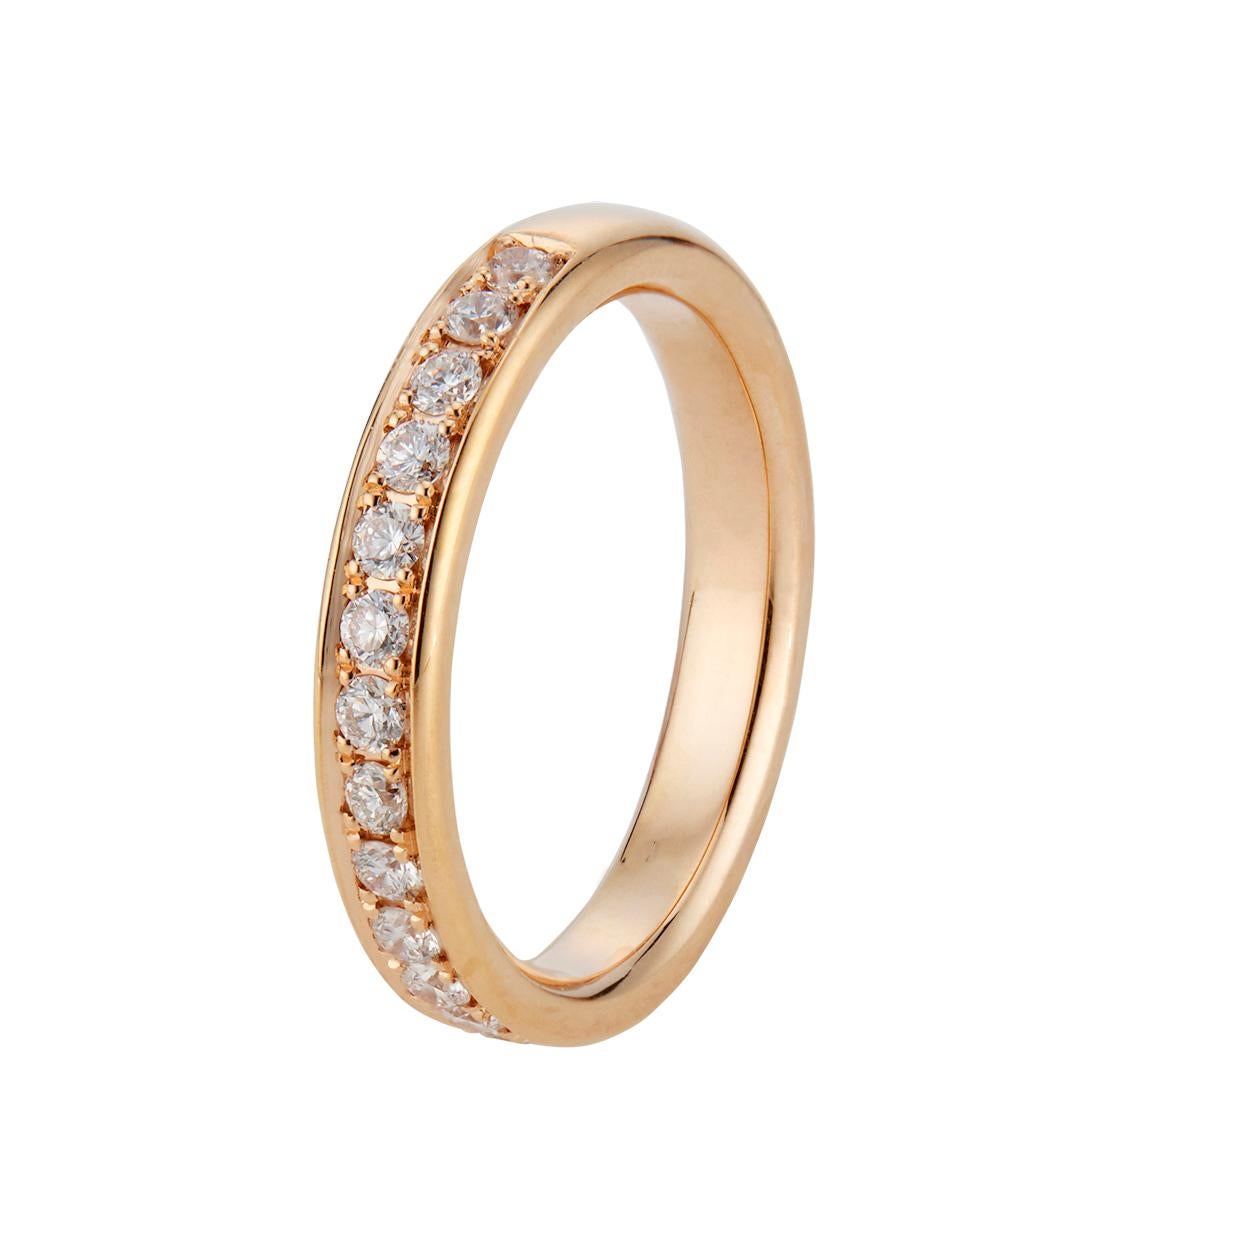 Peter Suchy .42 Carat Diamond Rose Gold Wedding Band Ring In New Condition For Sale In Stamford, CT